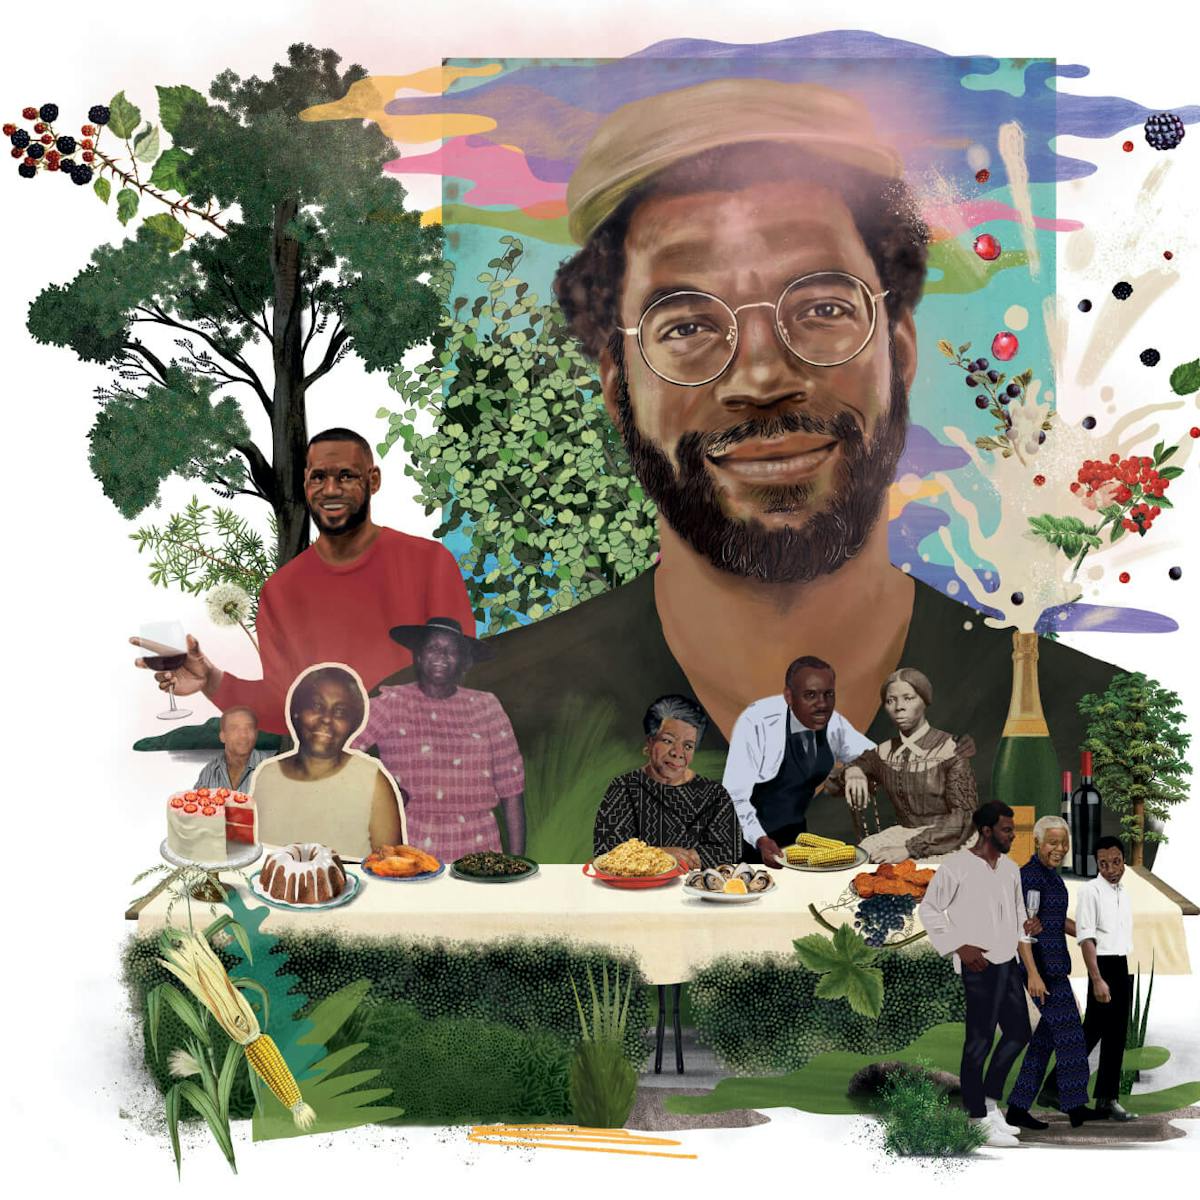 Illustration depicting Stephen Satterfield's dream last supper. A long table dressed in a cream table cloth is topped with various dishes, cakes, and bottles of wine and champagne. Around the table are depicted Stephen's parents and grandparents, alongside Maya Angelou, James Baldwin, Harriet Tubman, Nelson Mandela, and LeBron James. The setting is in a field in Atlanta, surrounded by trees and crops growing.